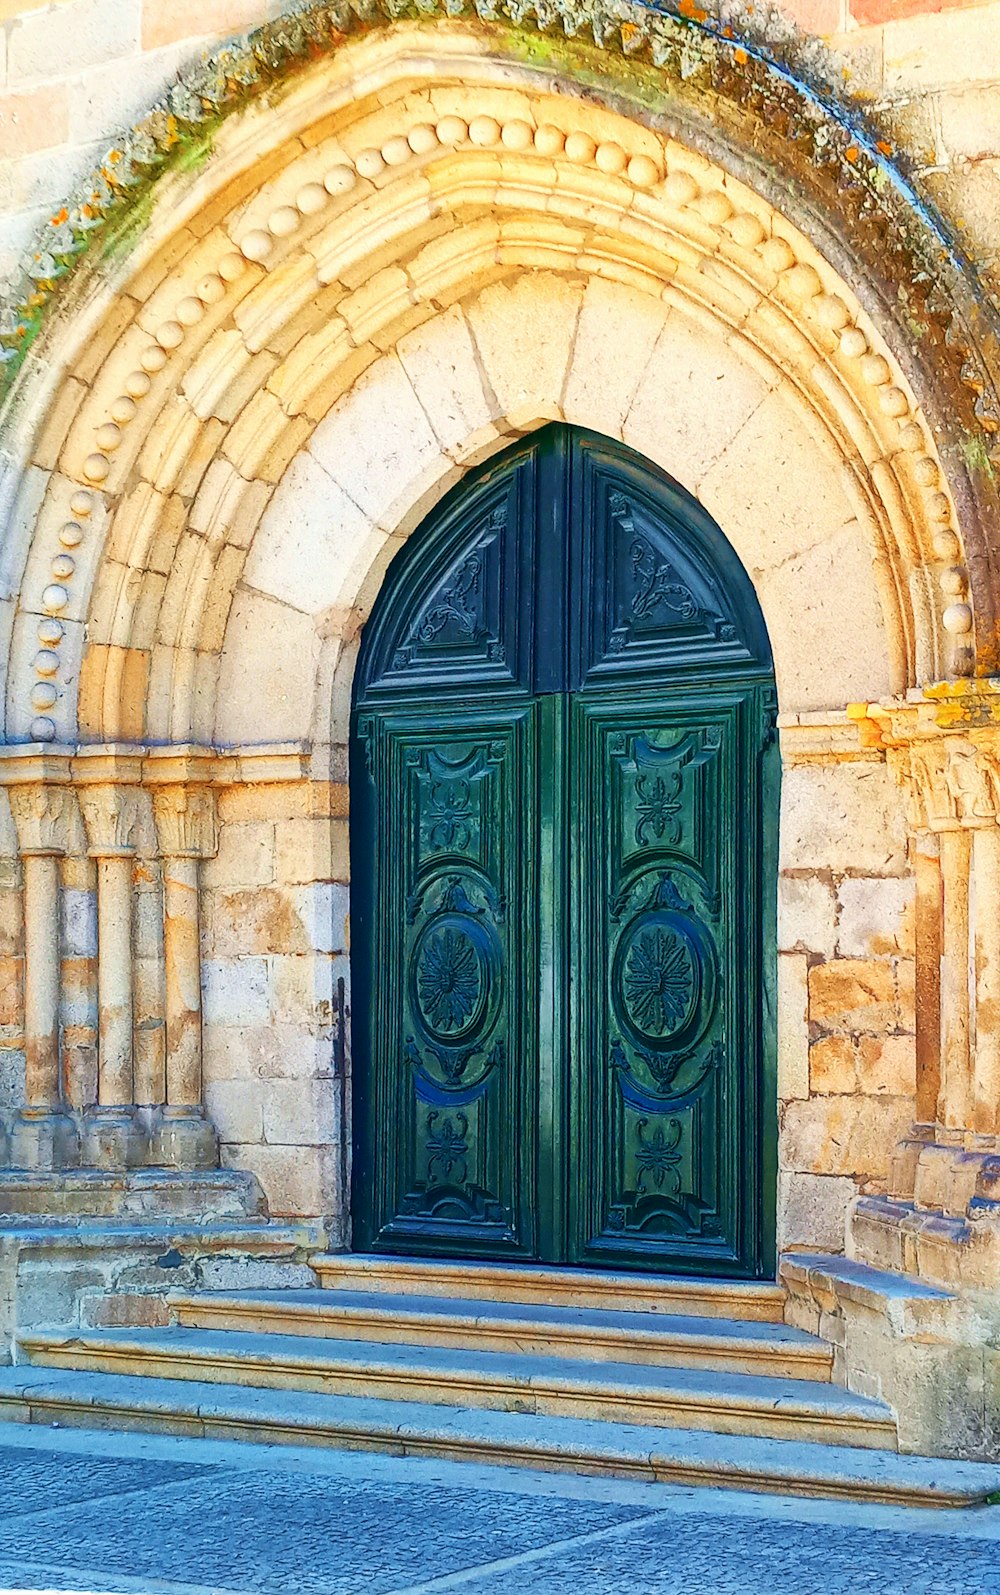 a large green door sitting in front of a stone building